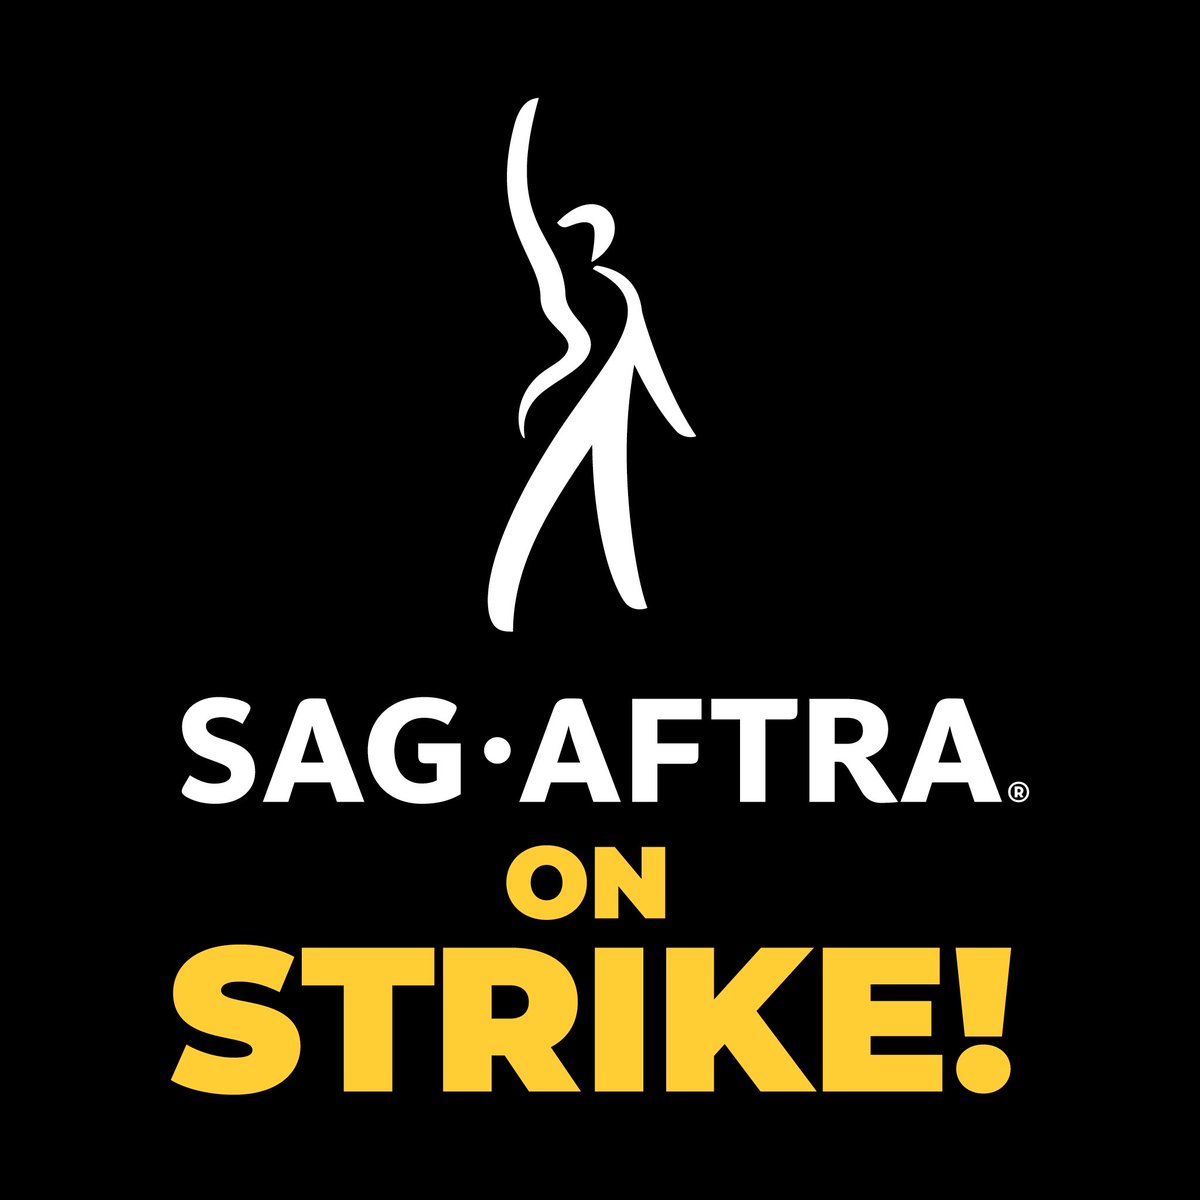 The careers of working class #sagaftramembers are in jeopardy because the AMPTP refuses to step into the 21st century. The future of the industry is at stake. We are taking action NOW. We are #SAGAFTRAstrong and we are on strike. #SAGAFTRAstrike